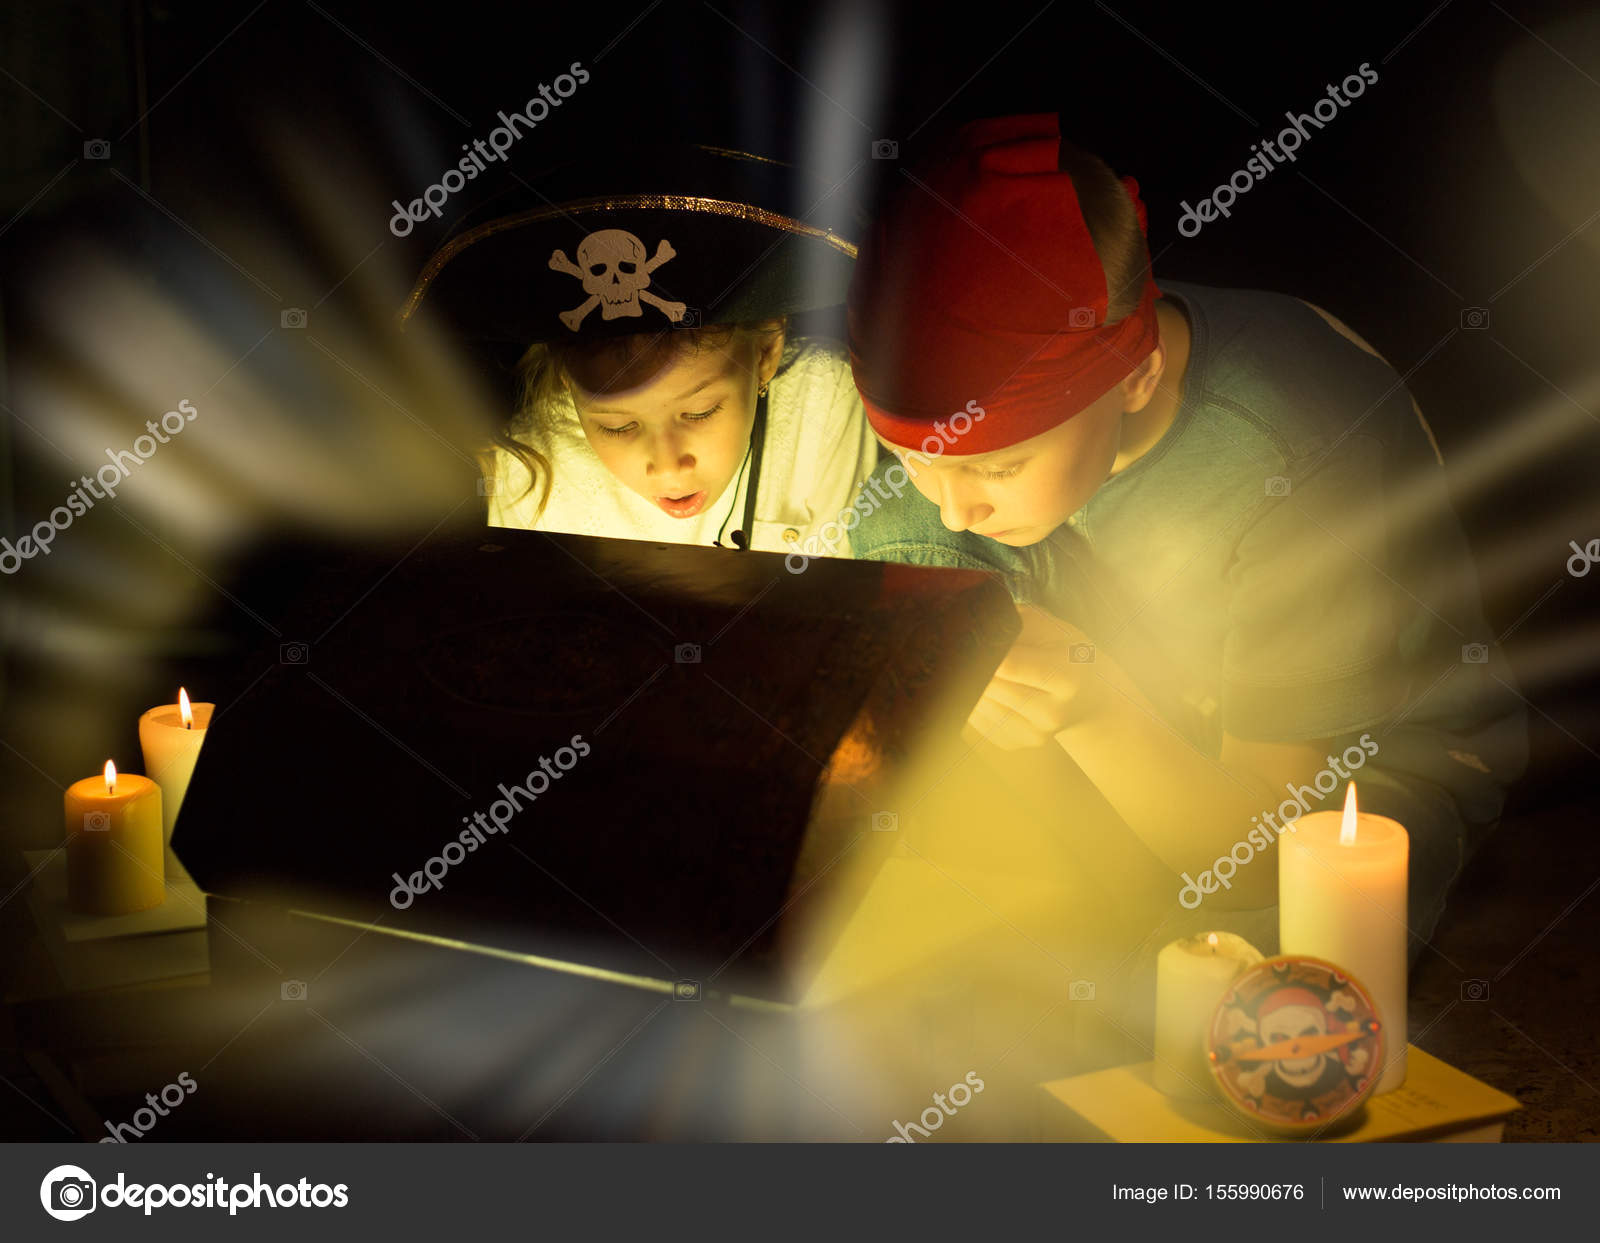 Handsome young pirate Stock Illustration